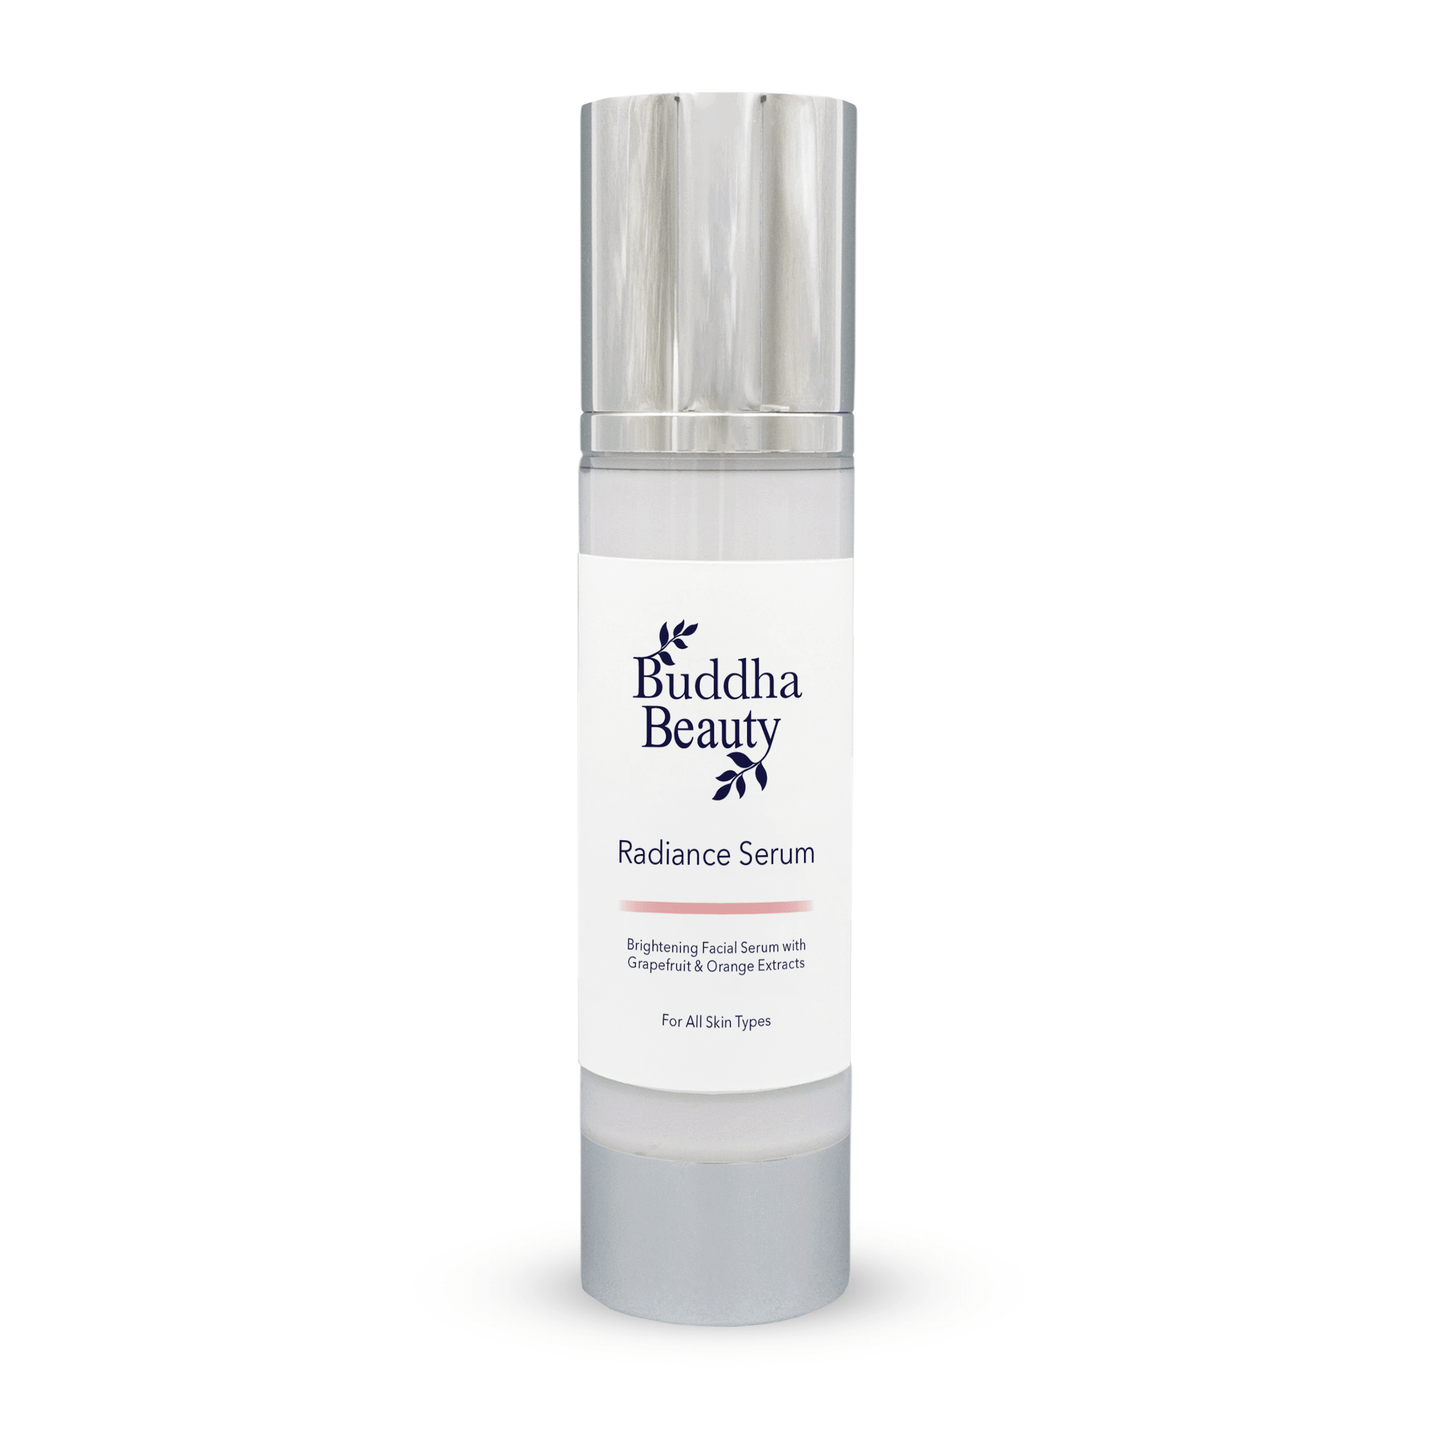 RADIANCE FACIAL SERUM WITH GRAPEFRUIT & ORANGE EXTRACTS